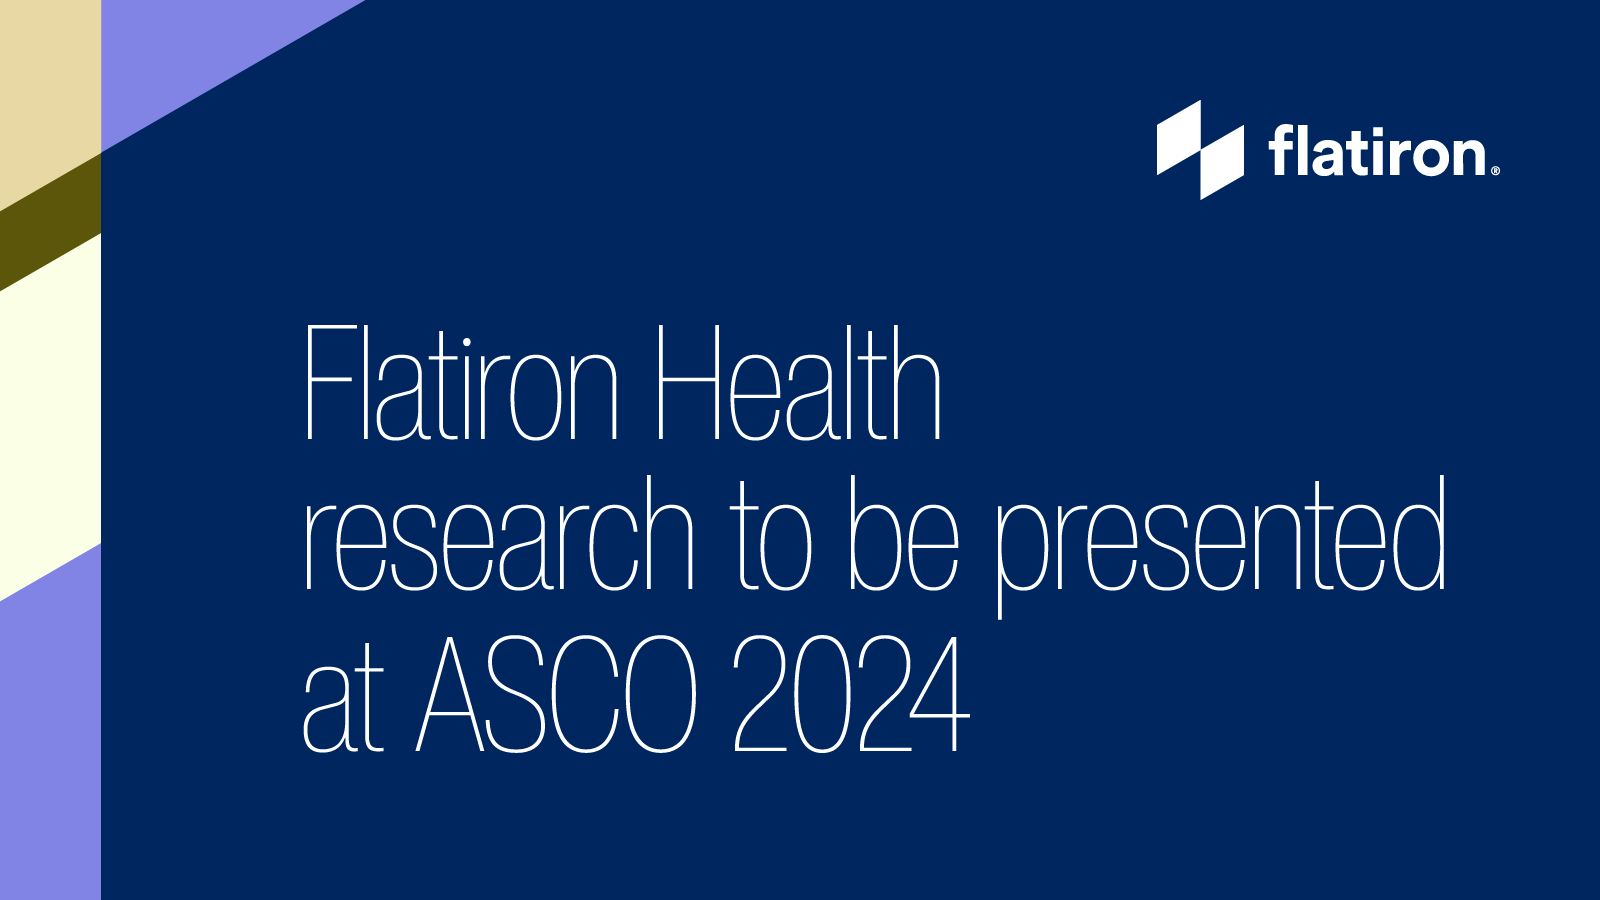 Flatiron Health announces research to be presented at American Society of Clinical Oncology 2024 Annual Meeting